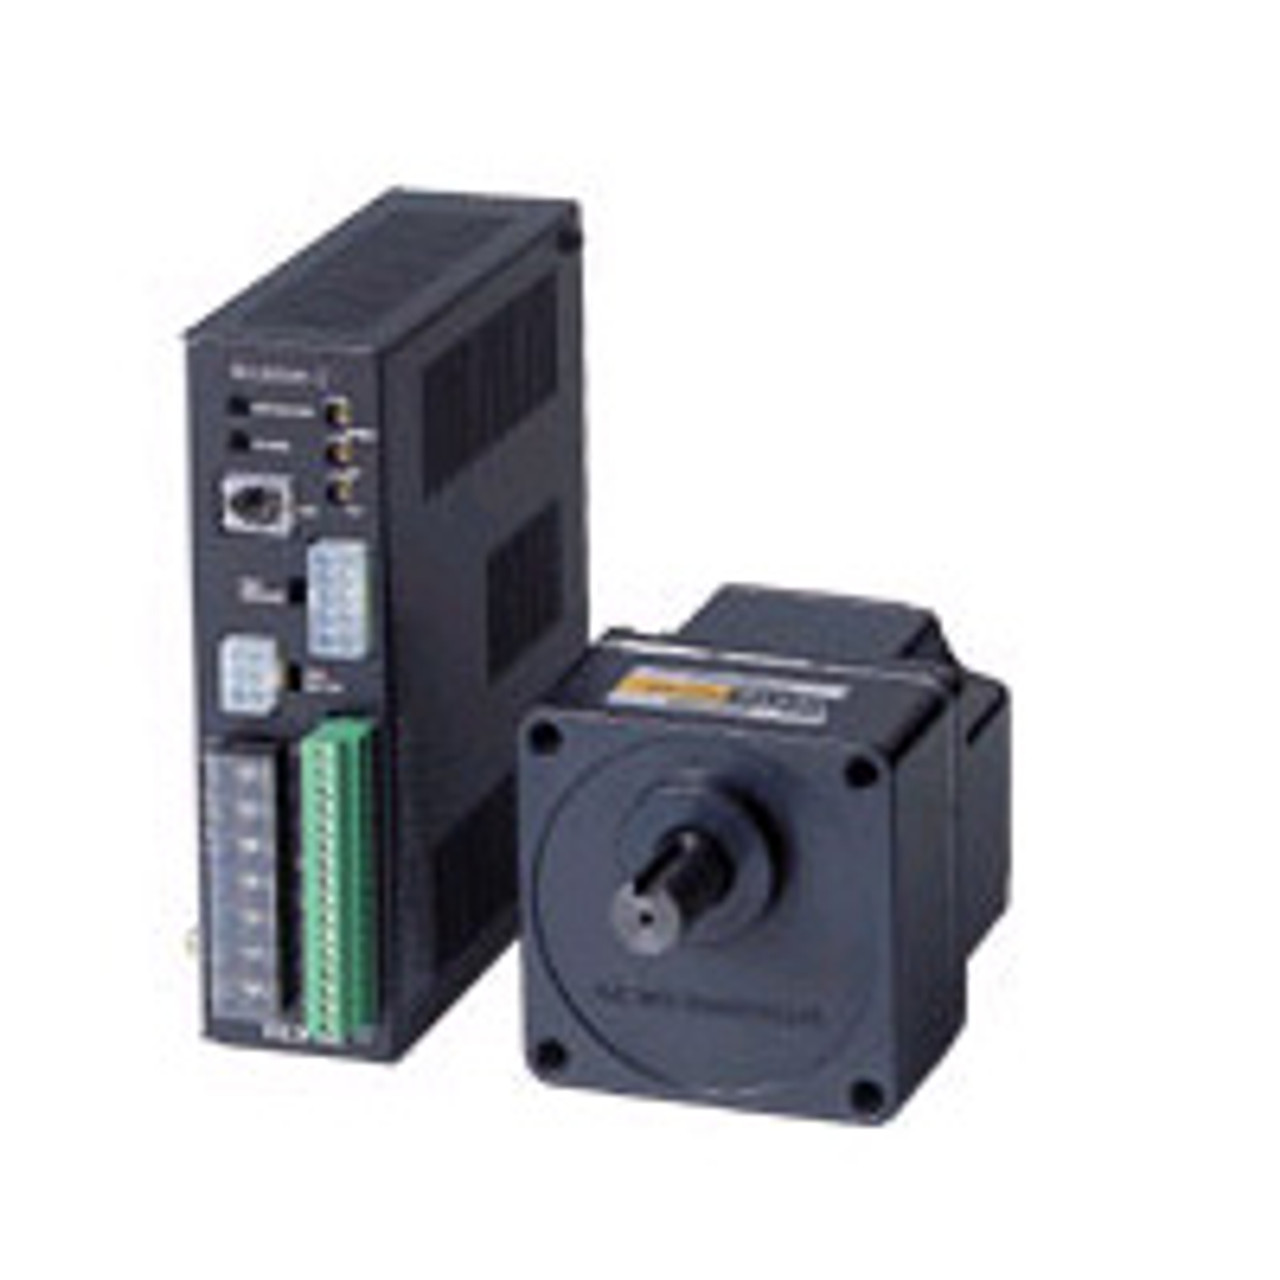 BX460A-100 - Product Image